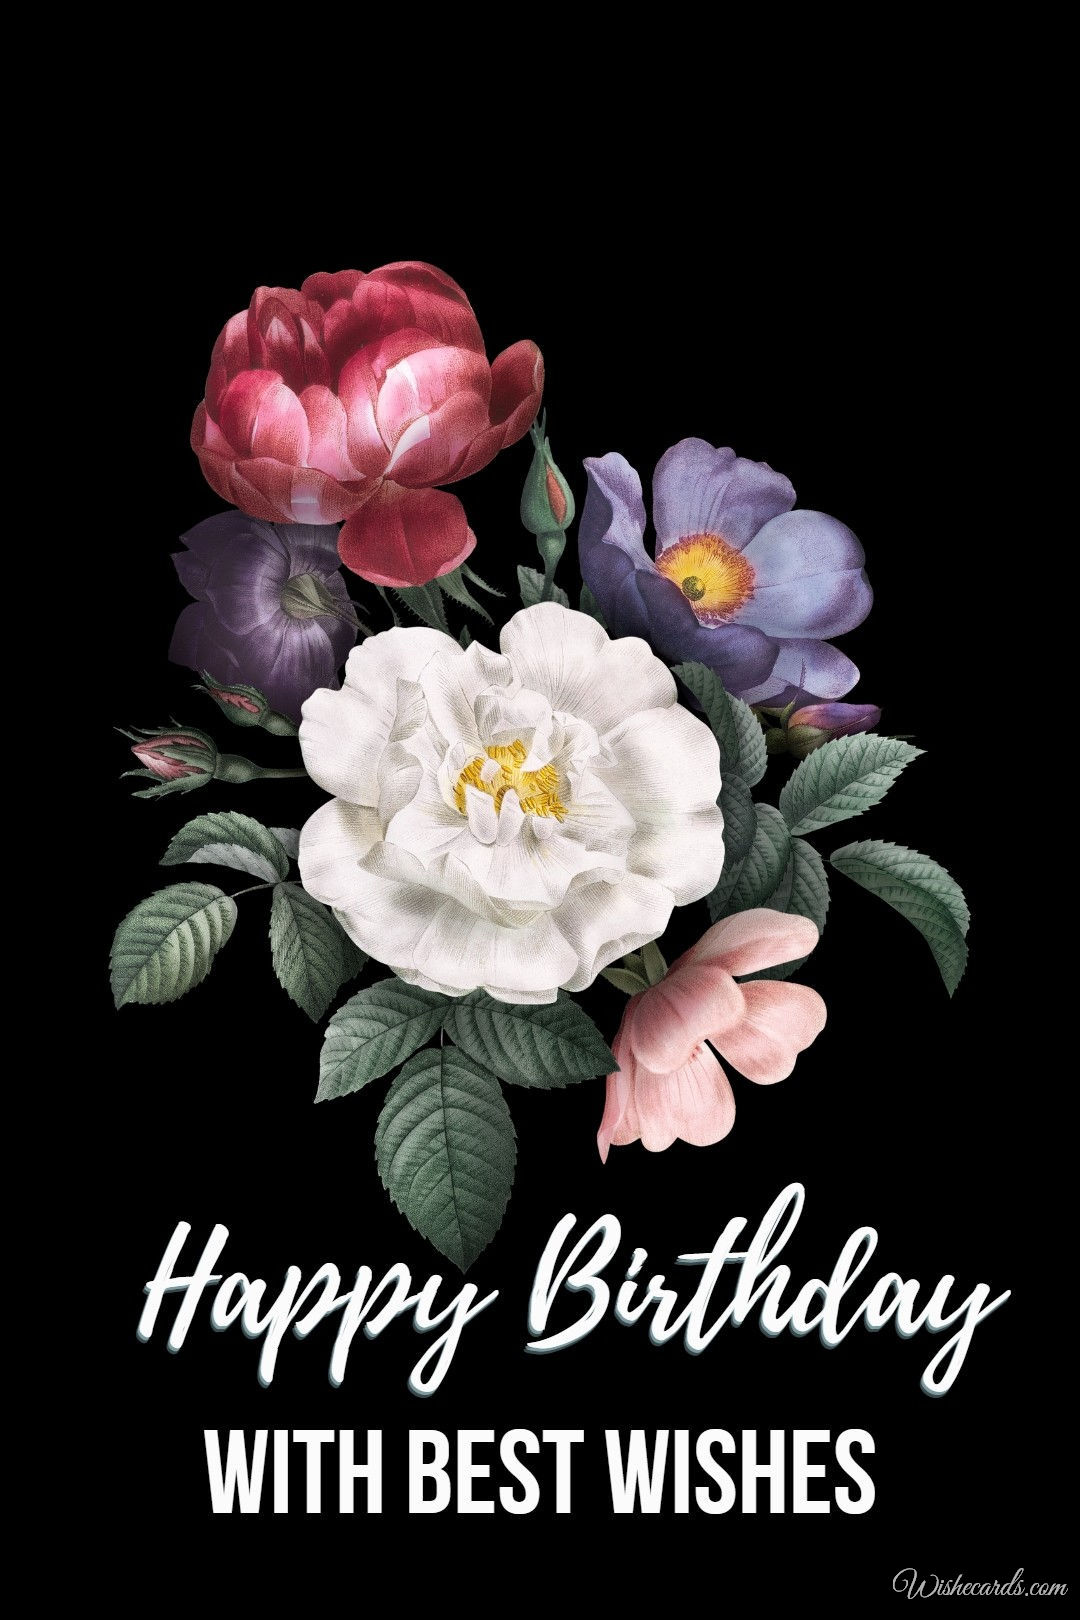 Happy Birthday Card For Woman With Flowers